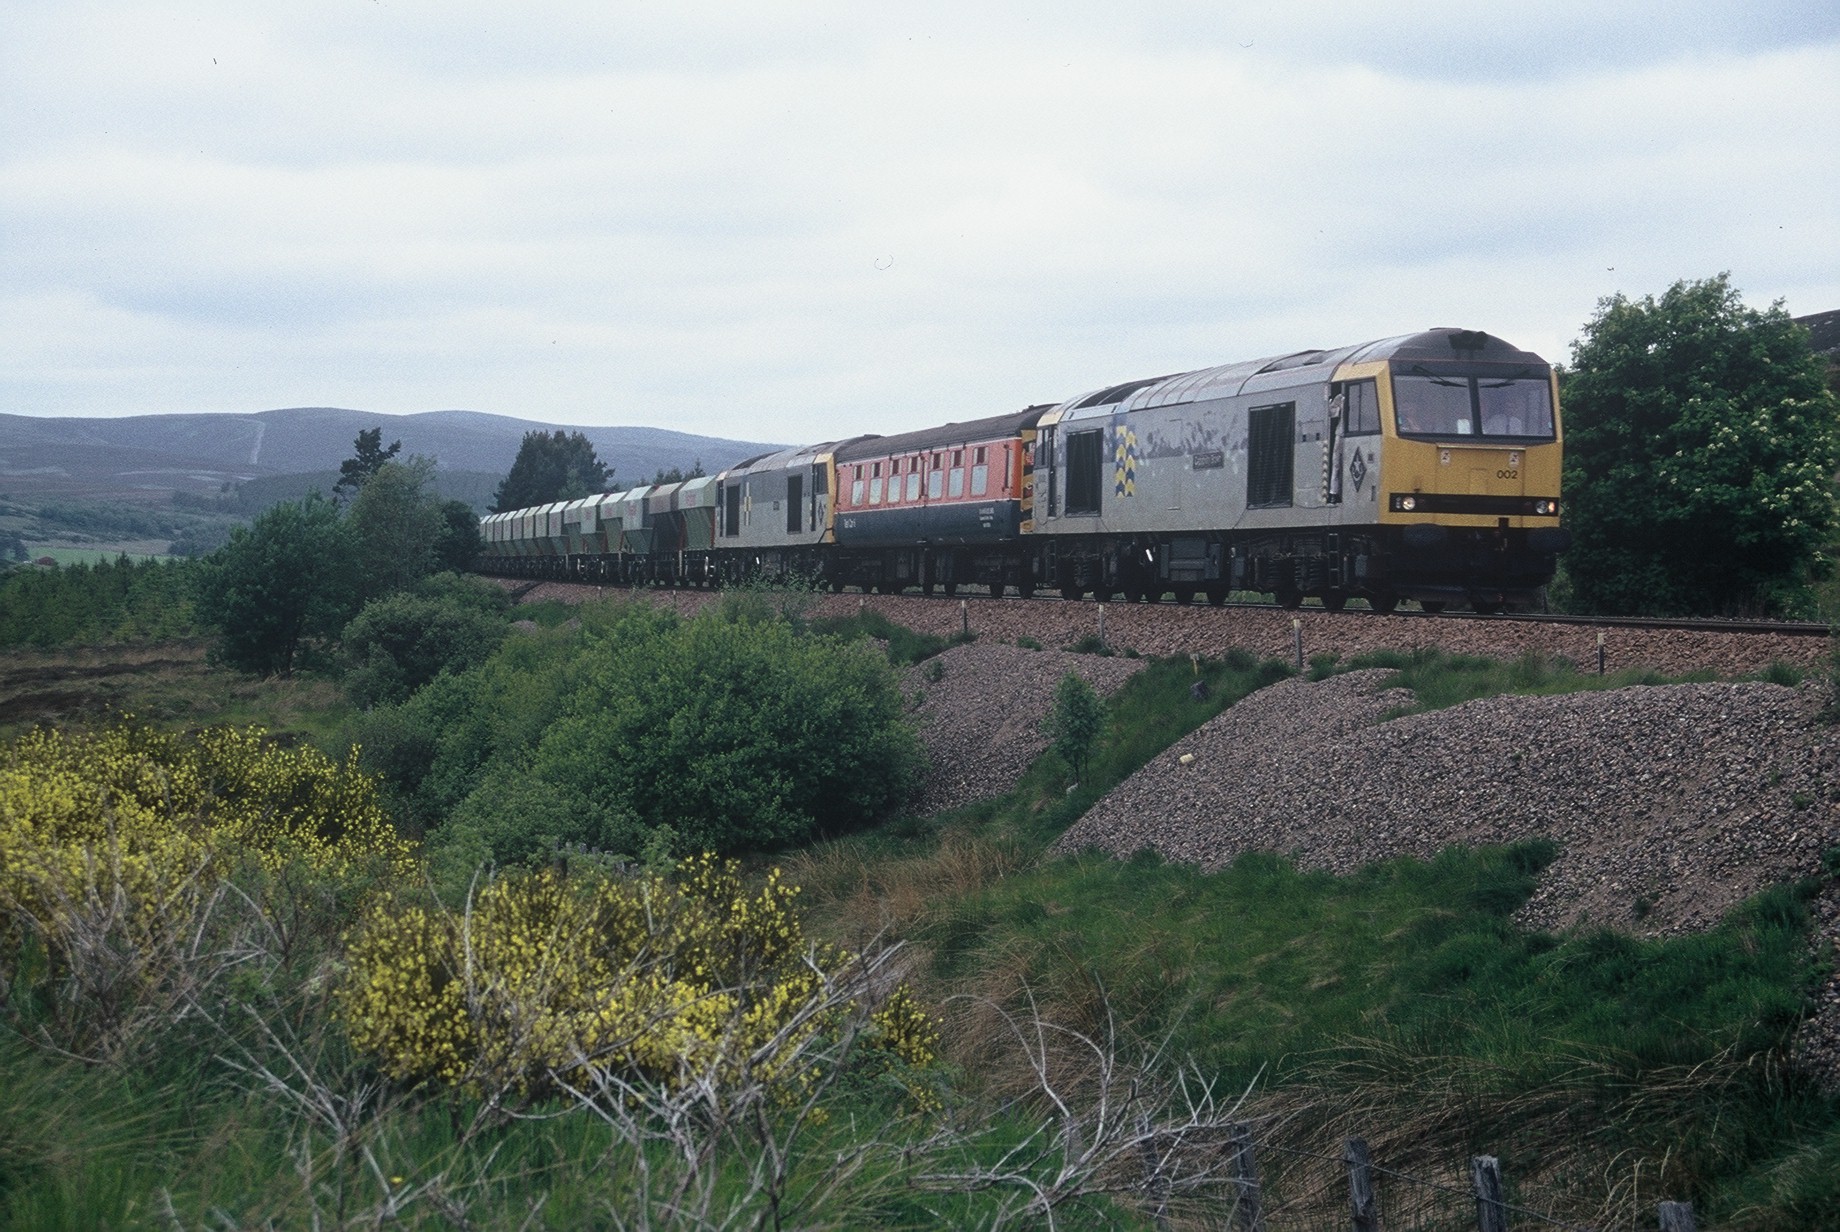 Test train after arrival in Inverness, 10th June 1990. Douglas Low